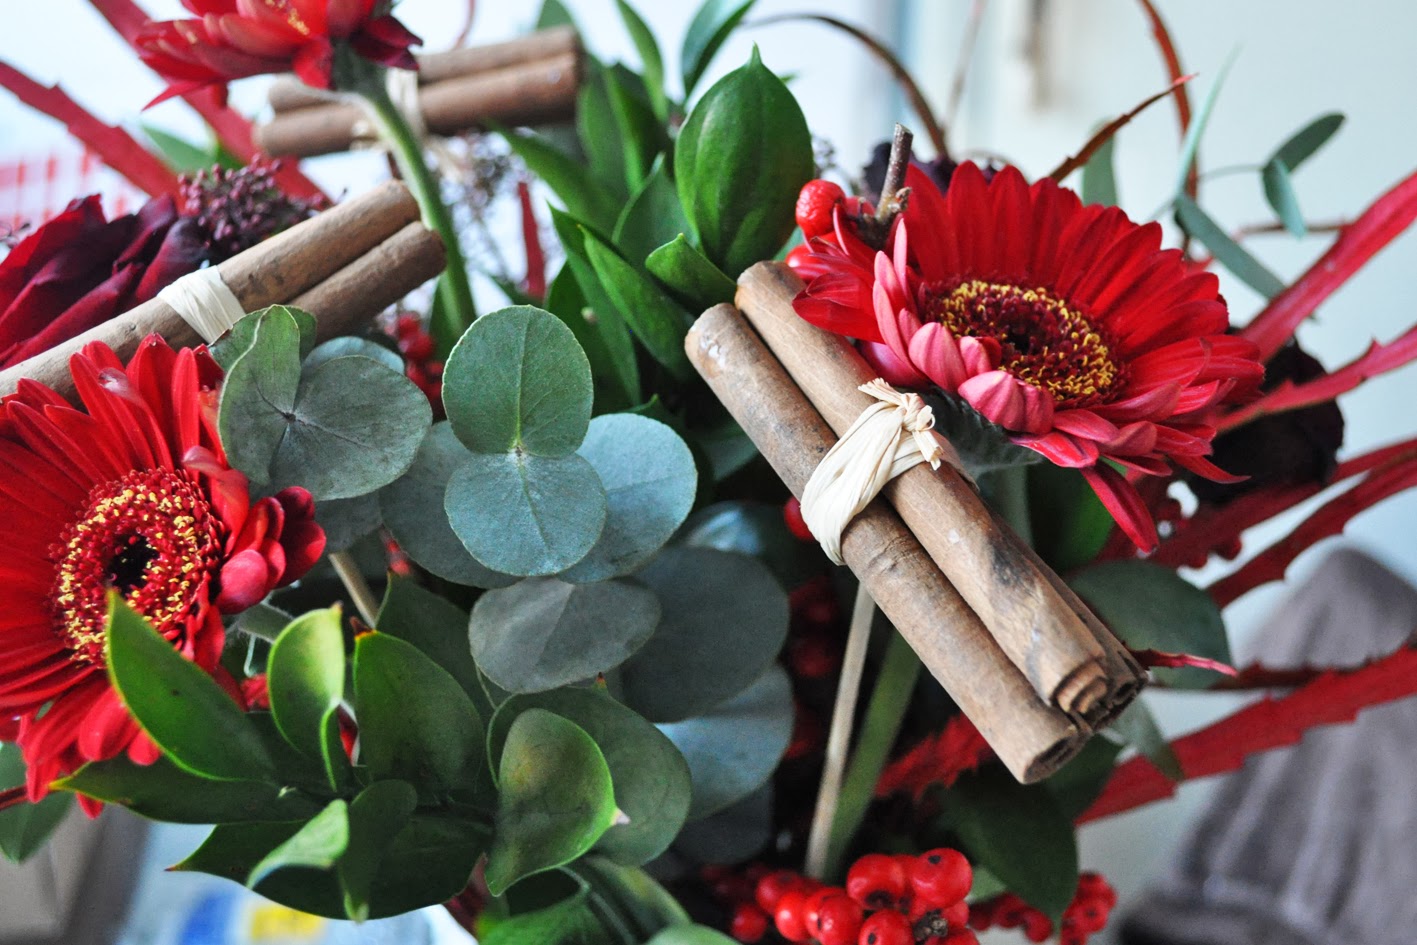 ... , beauty and lifestyle blog.: Review: Debenhams Christmas Flowers